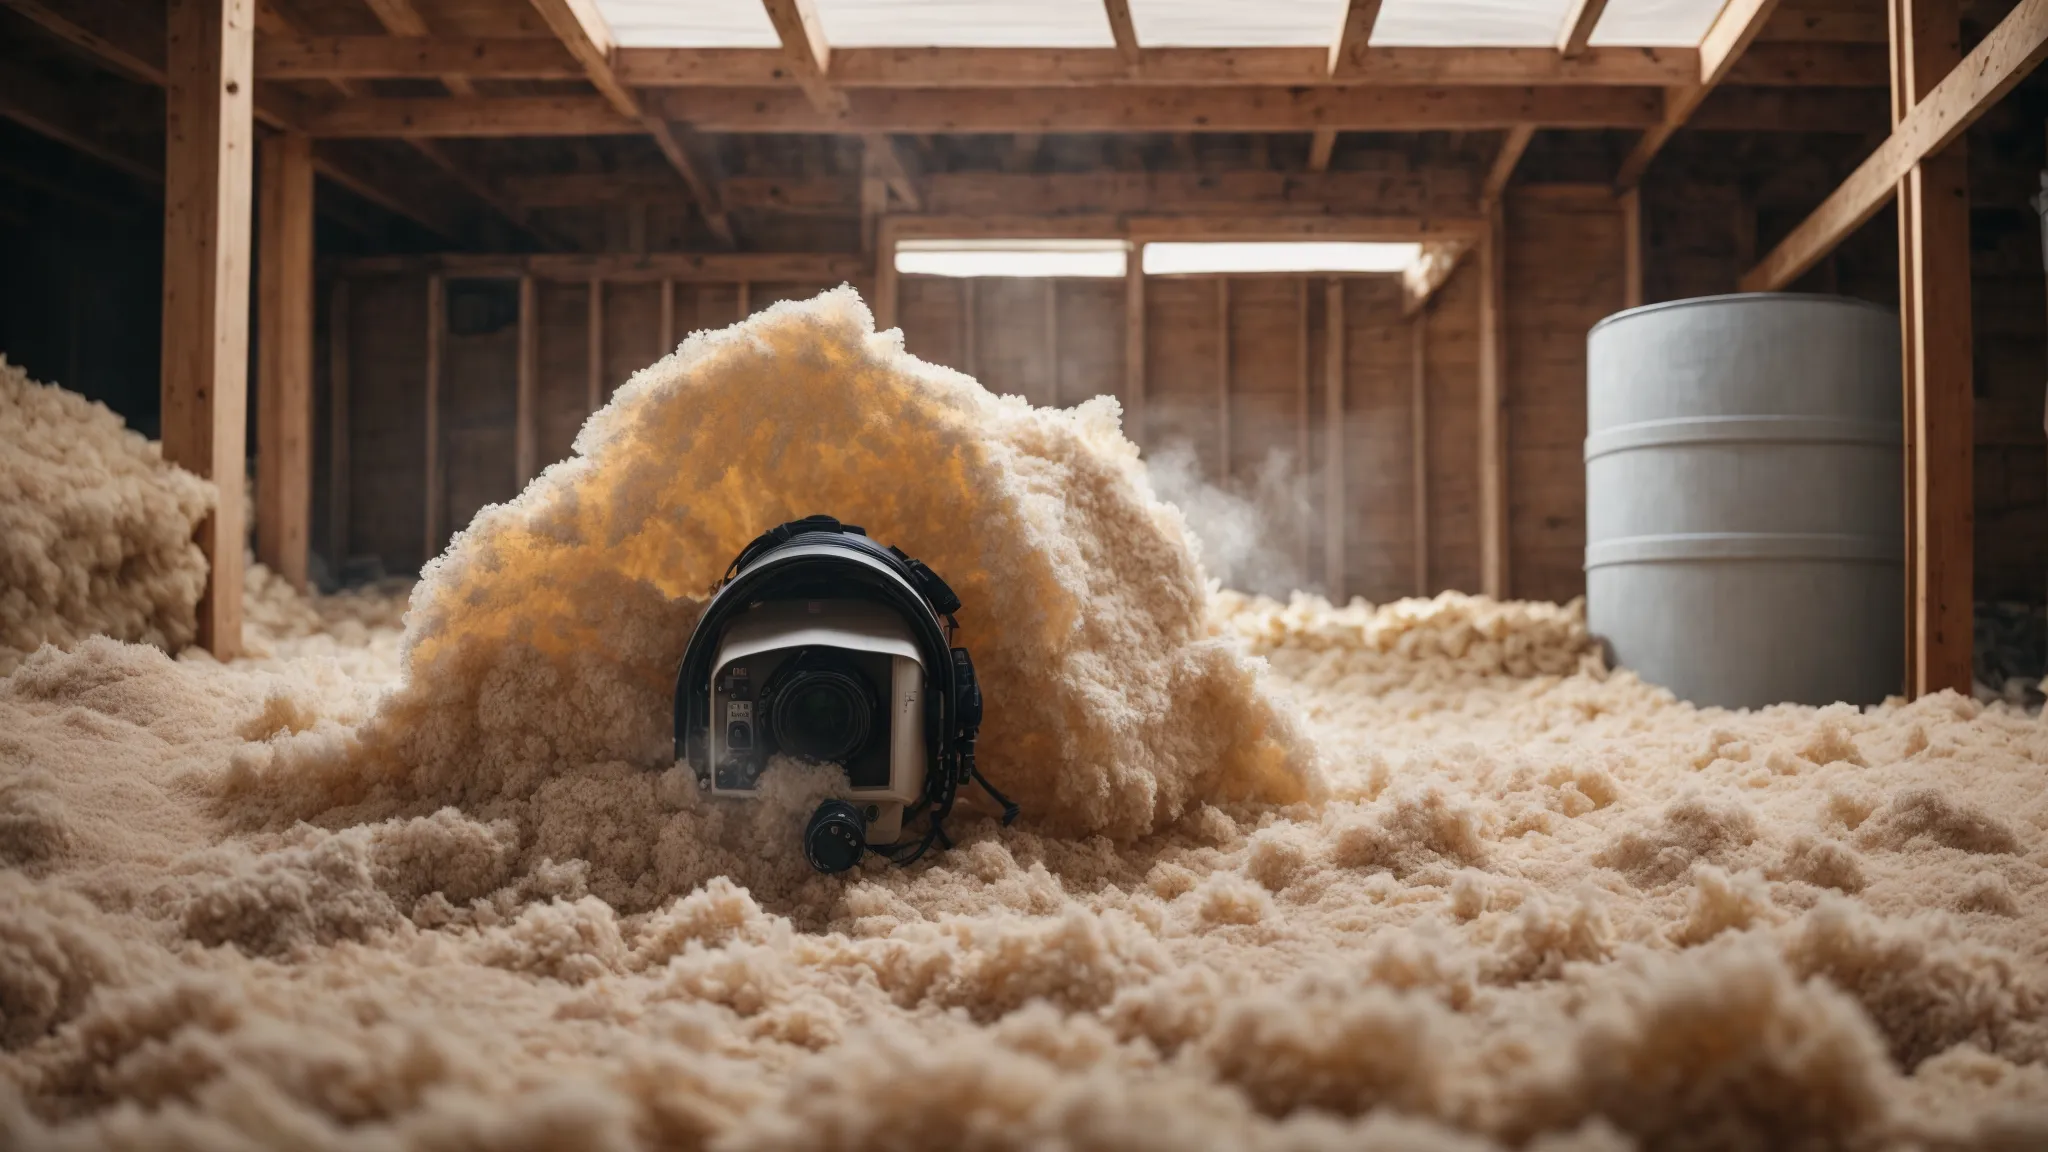 a dusty attic filled with insulation material and a filtration mask lying atop it, symbolizing air quality concerns.